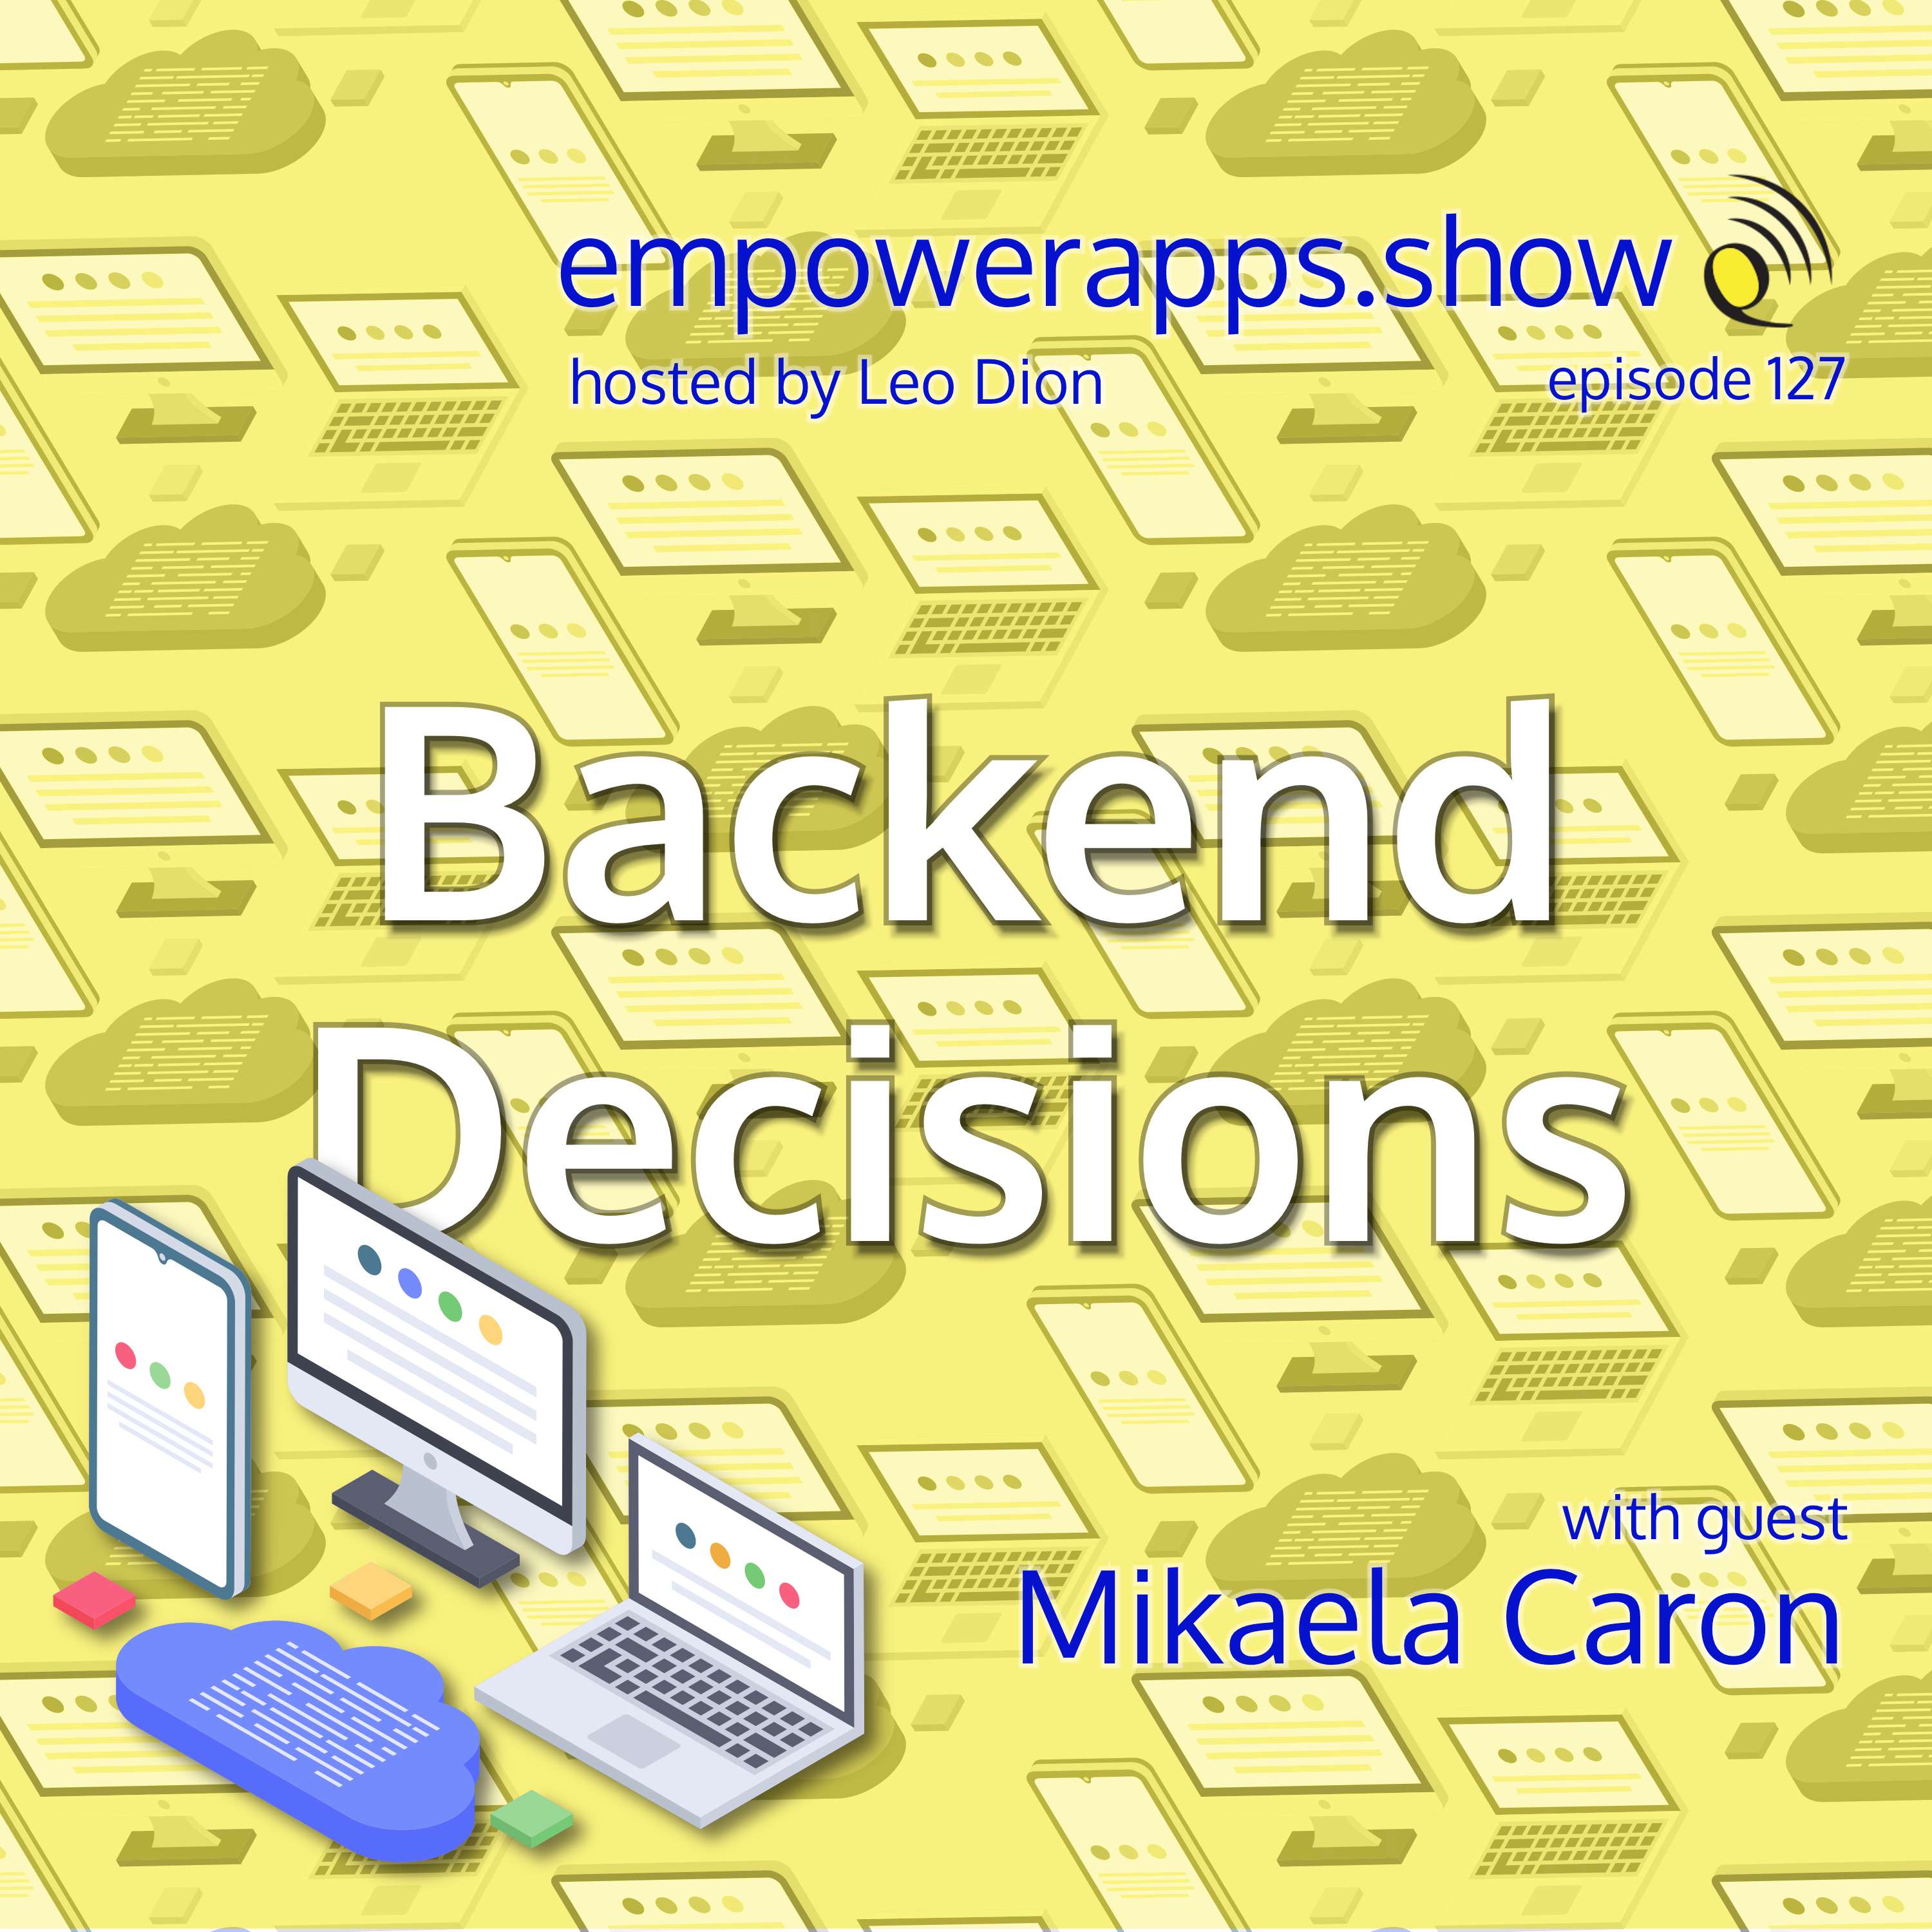 Backend Decisions with Mikaela Caron